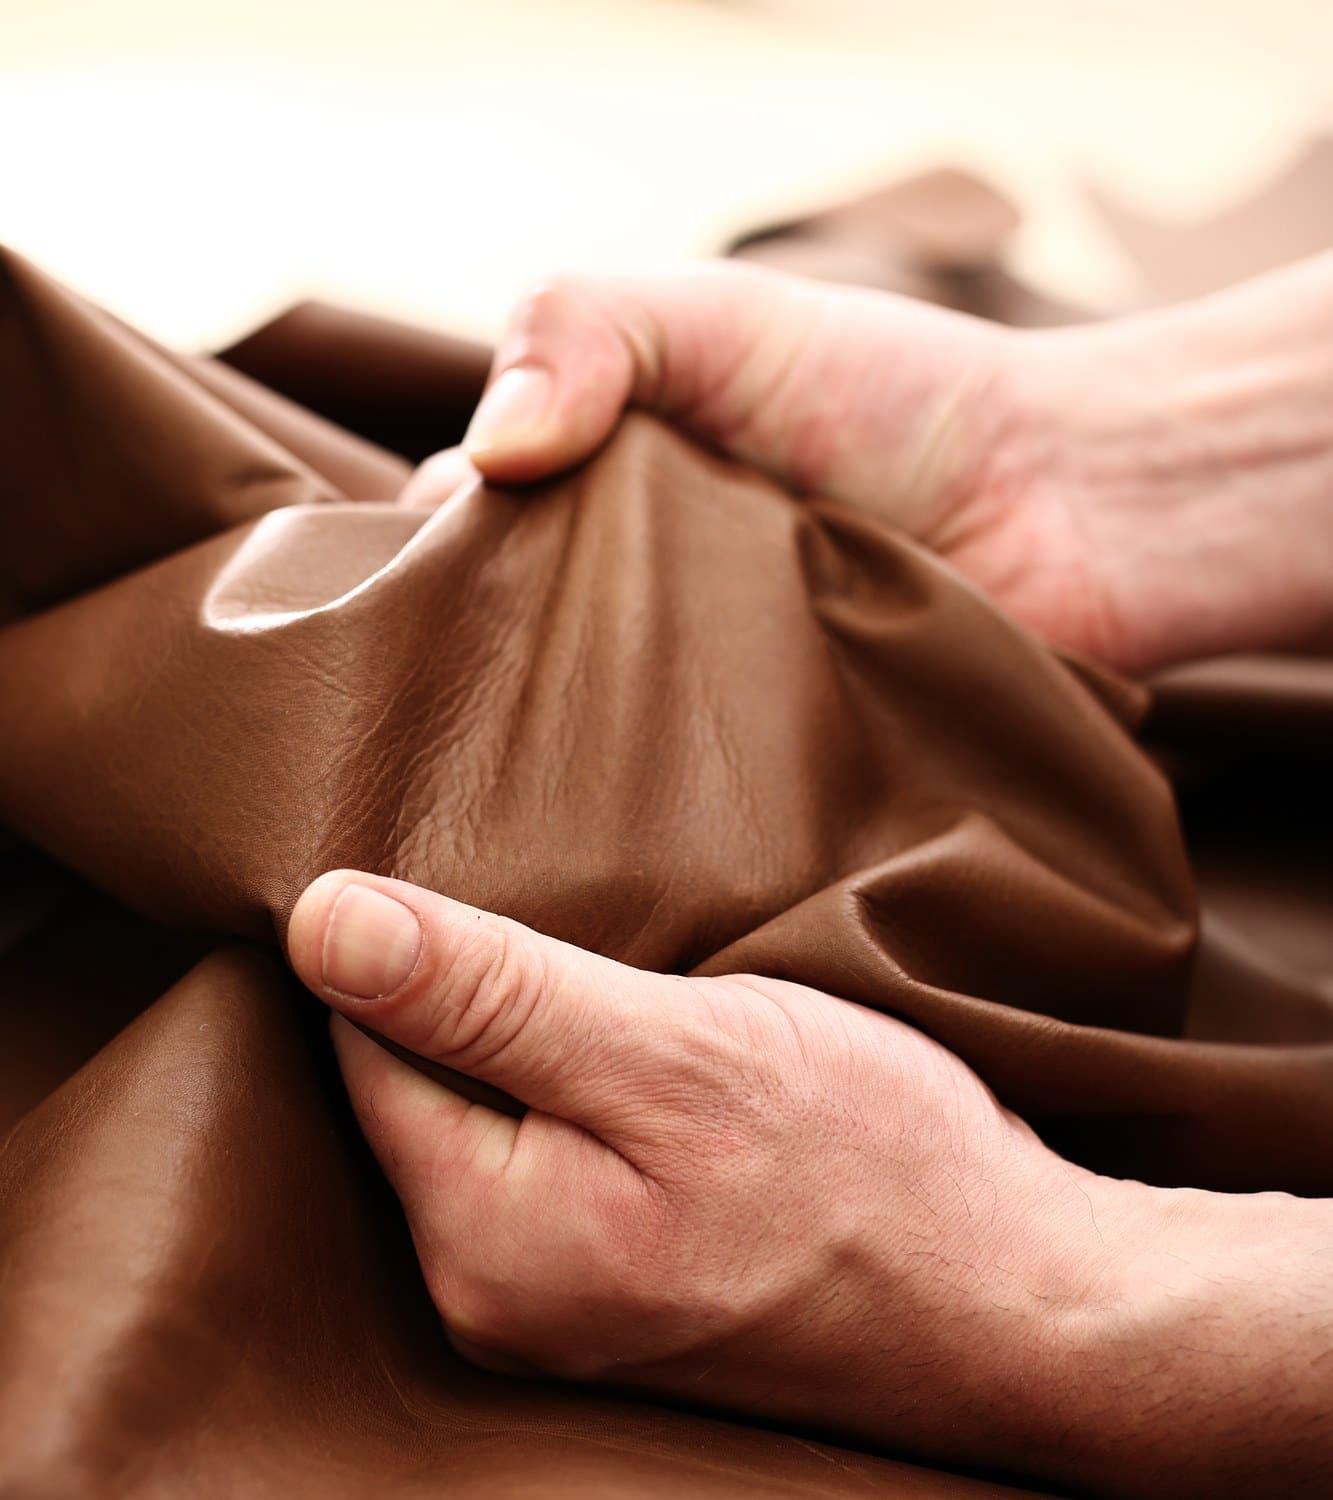 The Five Types of Leather: Styles, Tanning, and Care Tips - Our Stories